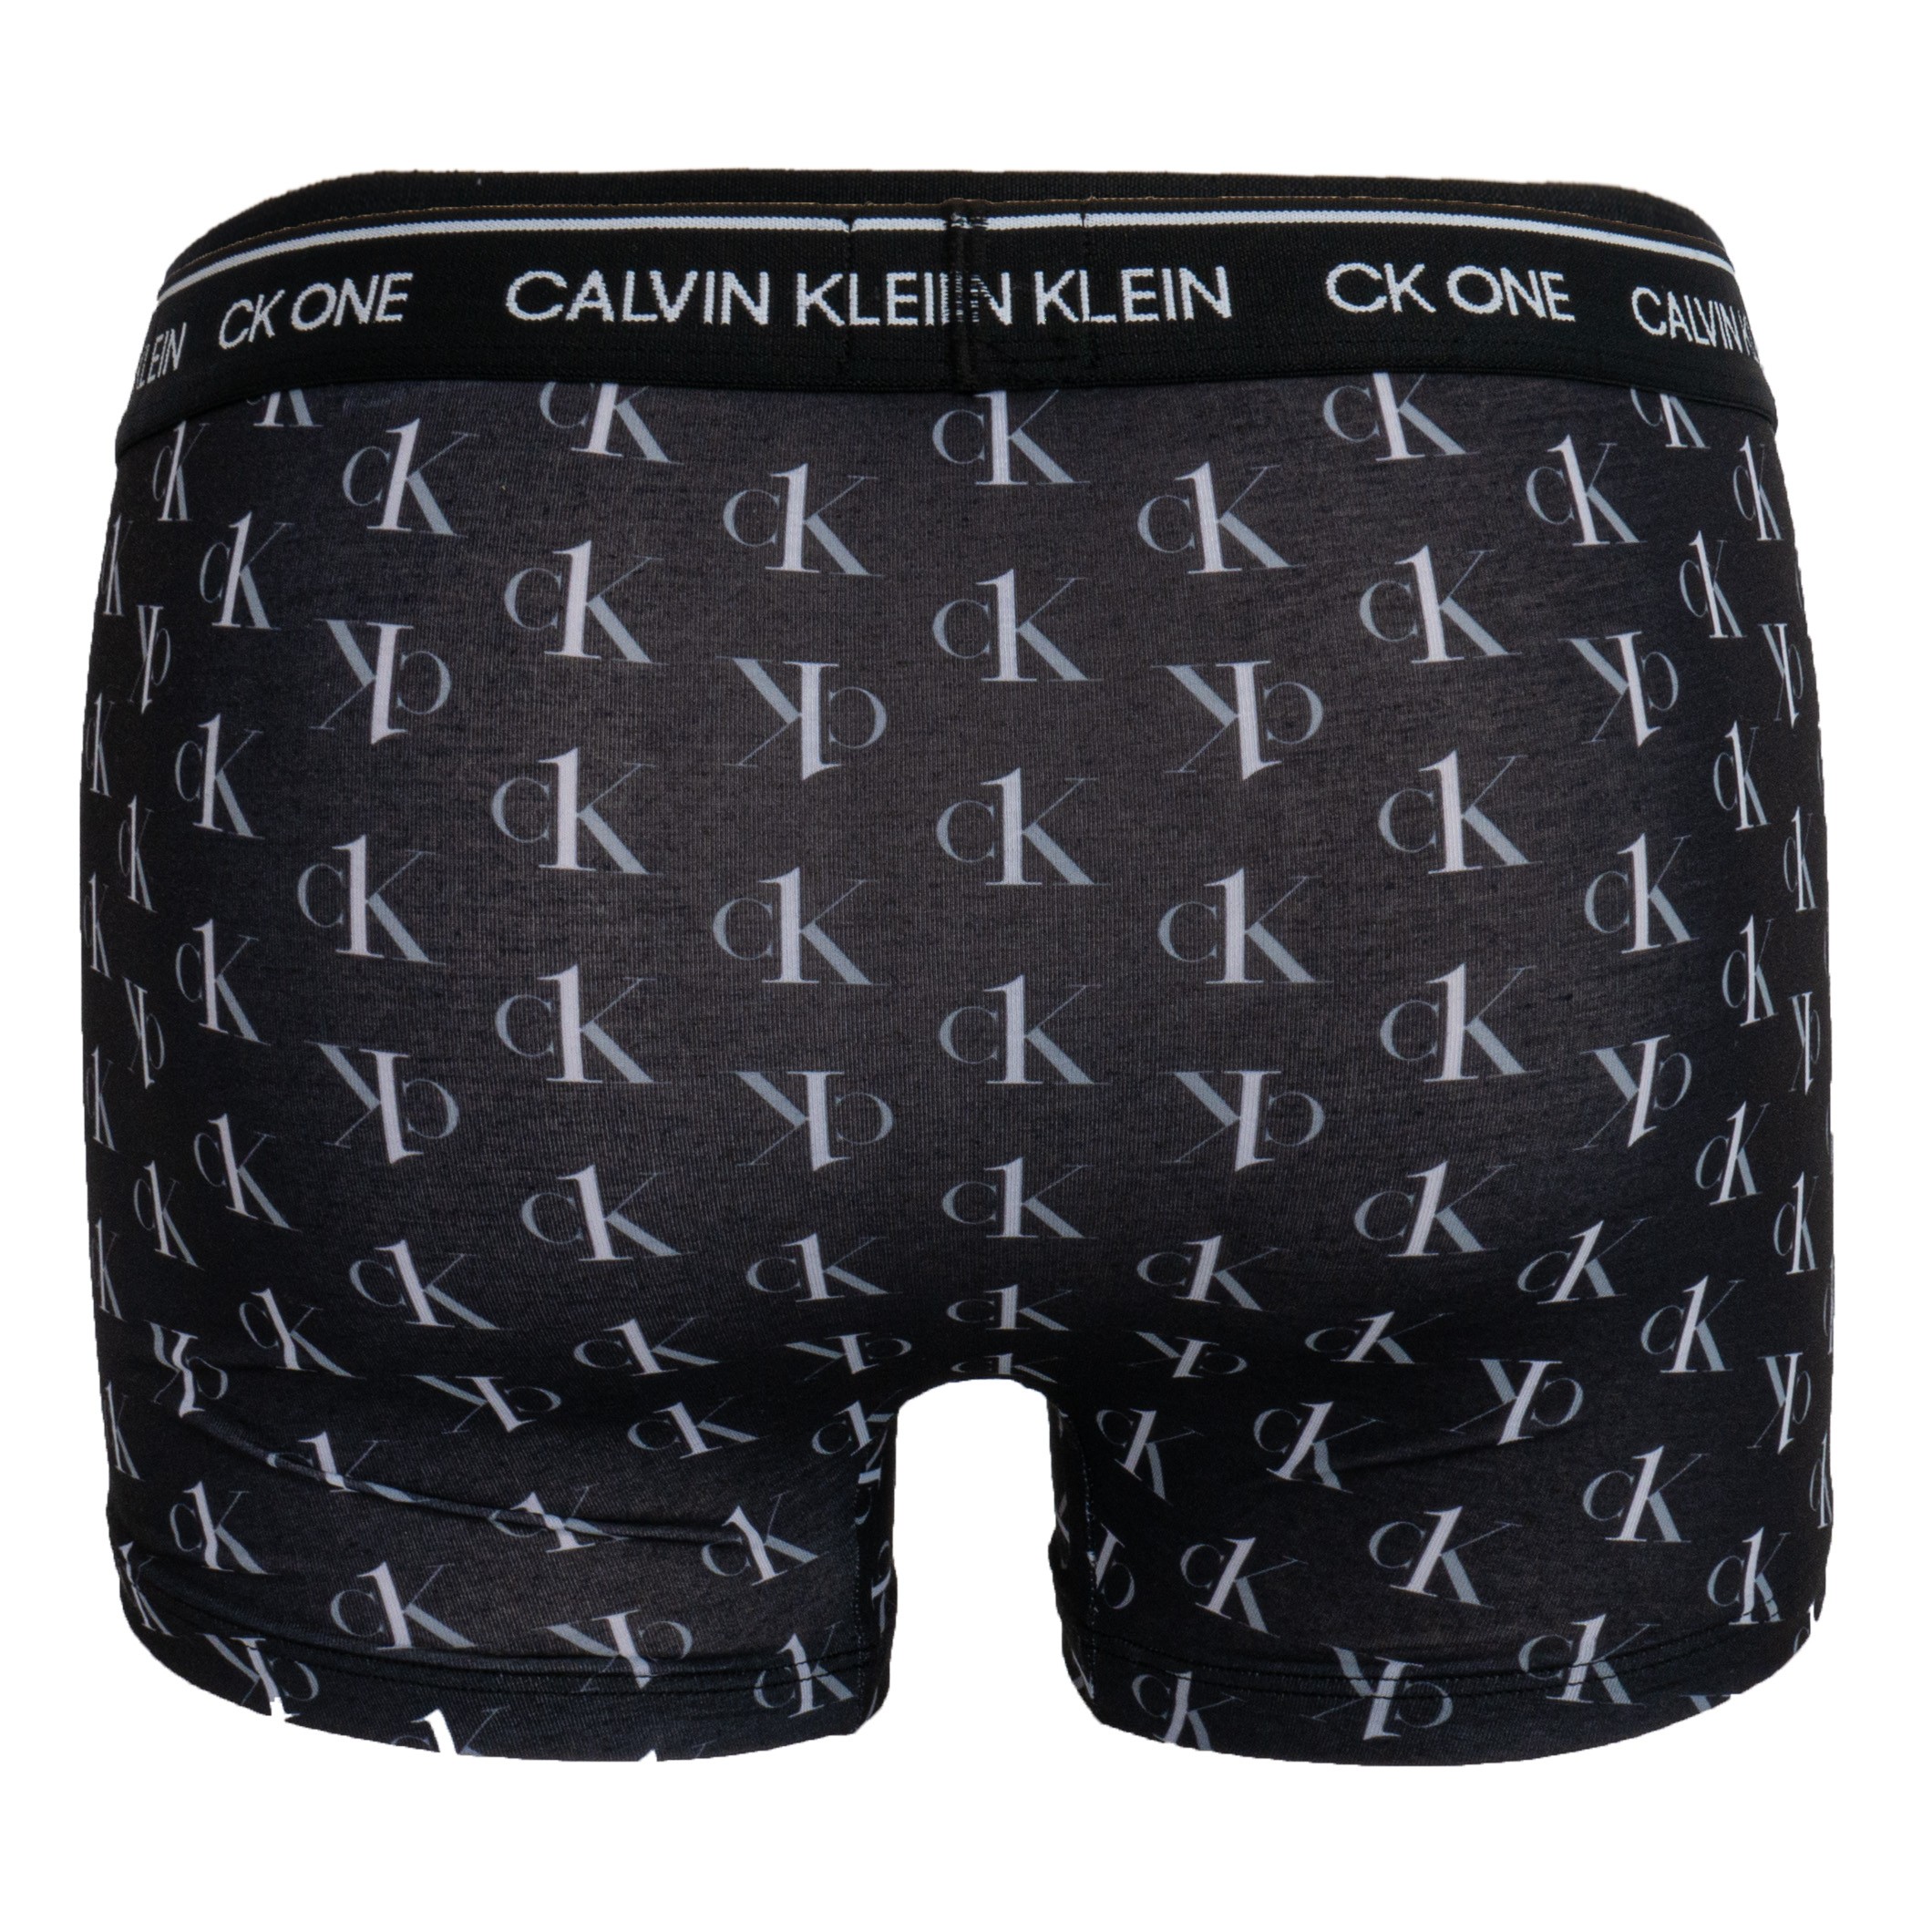 Boxer - CK ONE RECYCLED limited edition print black: Boxers for man